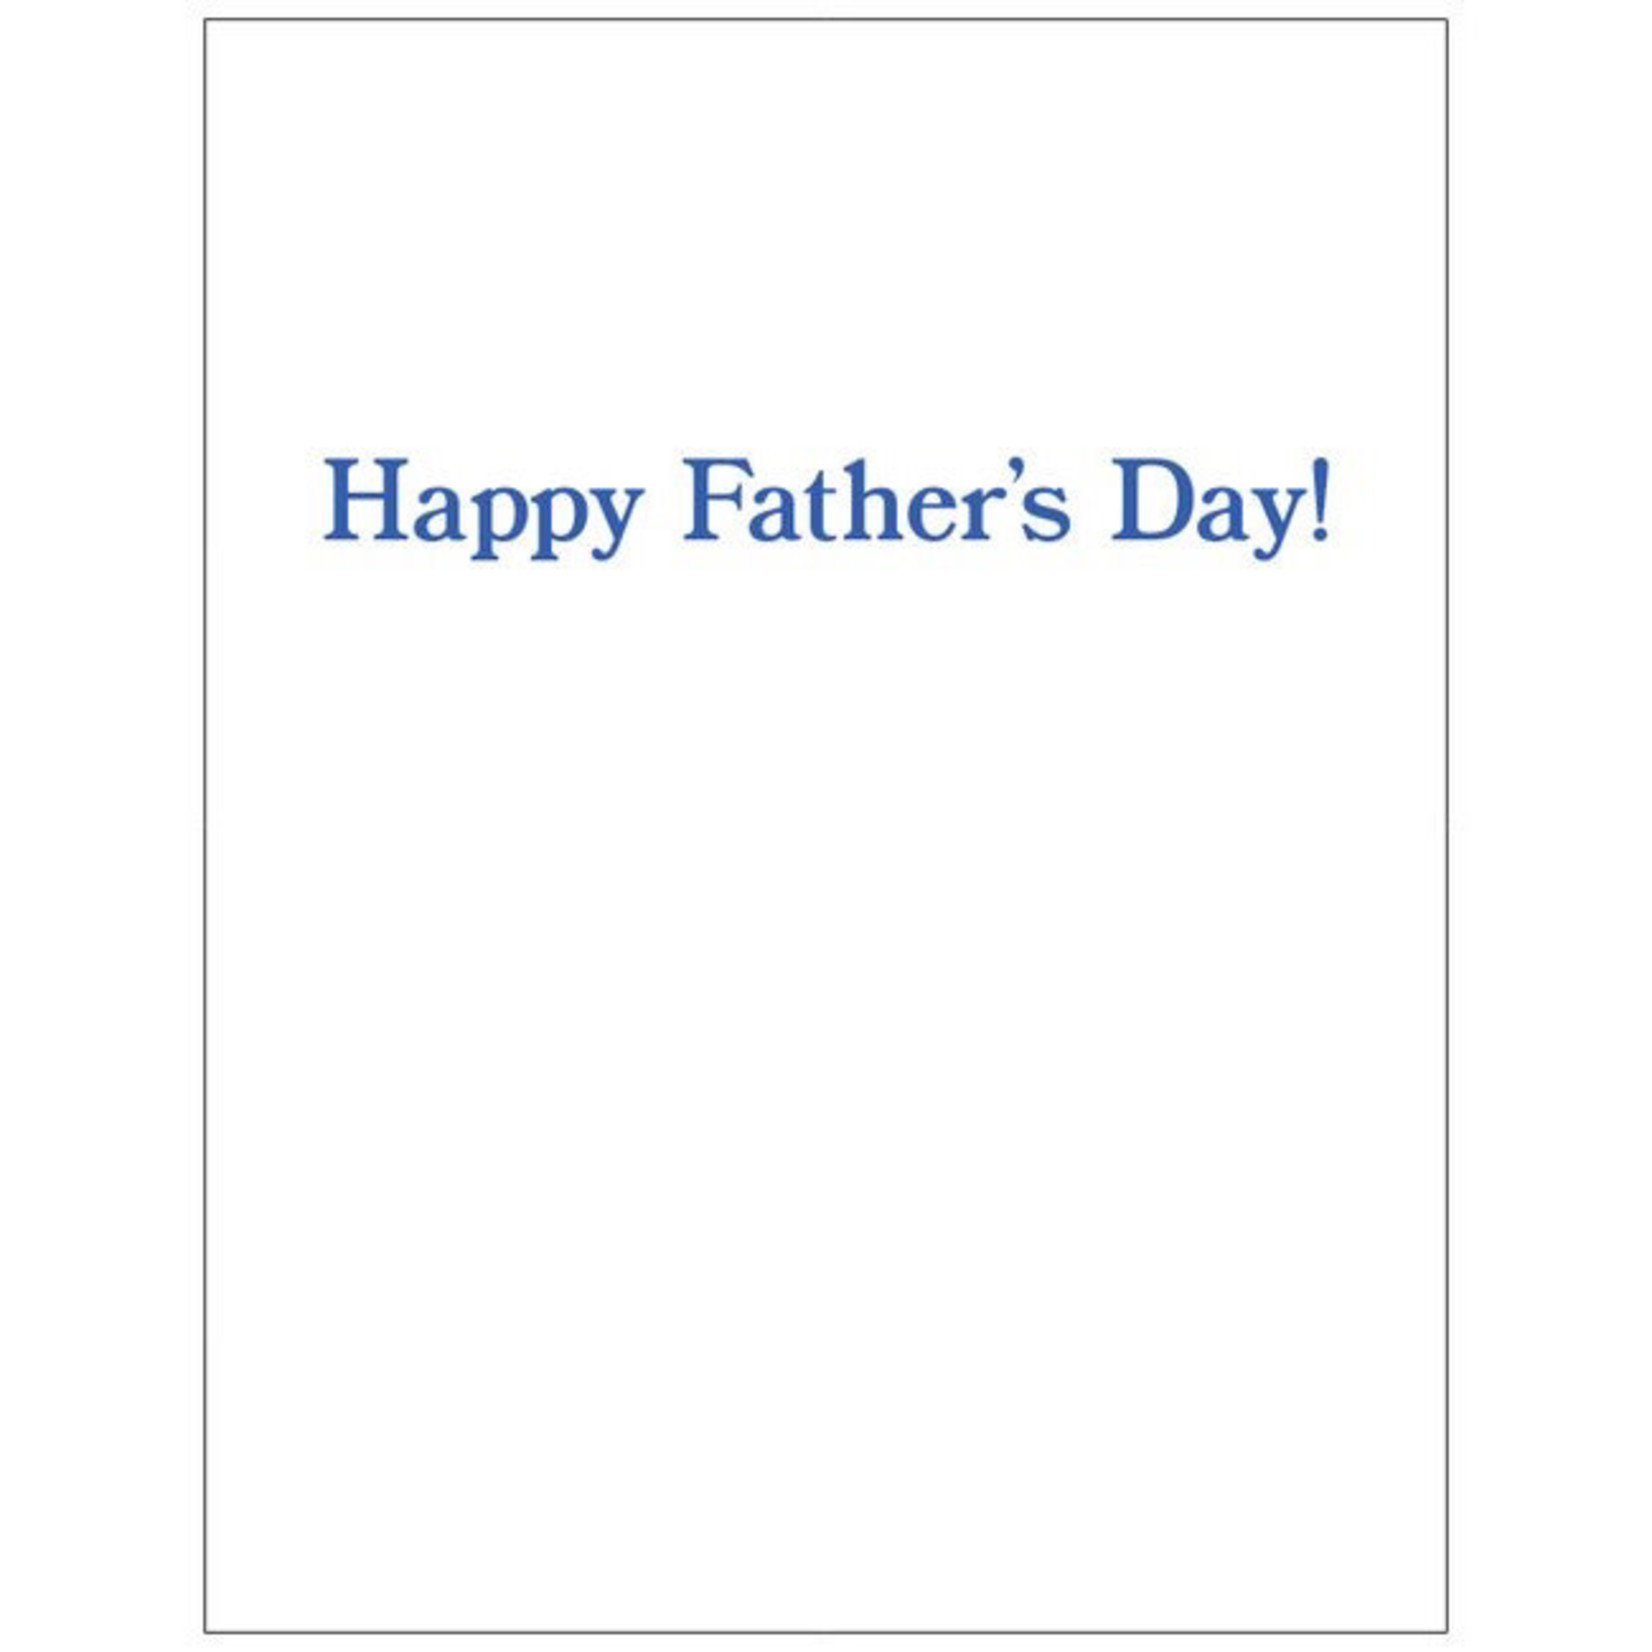 Bad Annie’s Card #202 - Fucked It Up With Kids, Happy Fathers Day